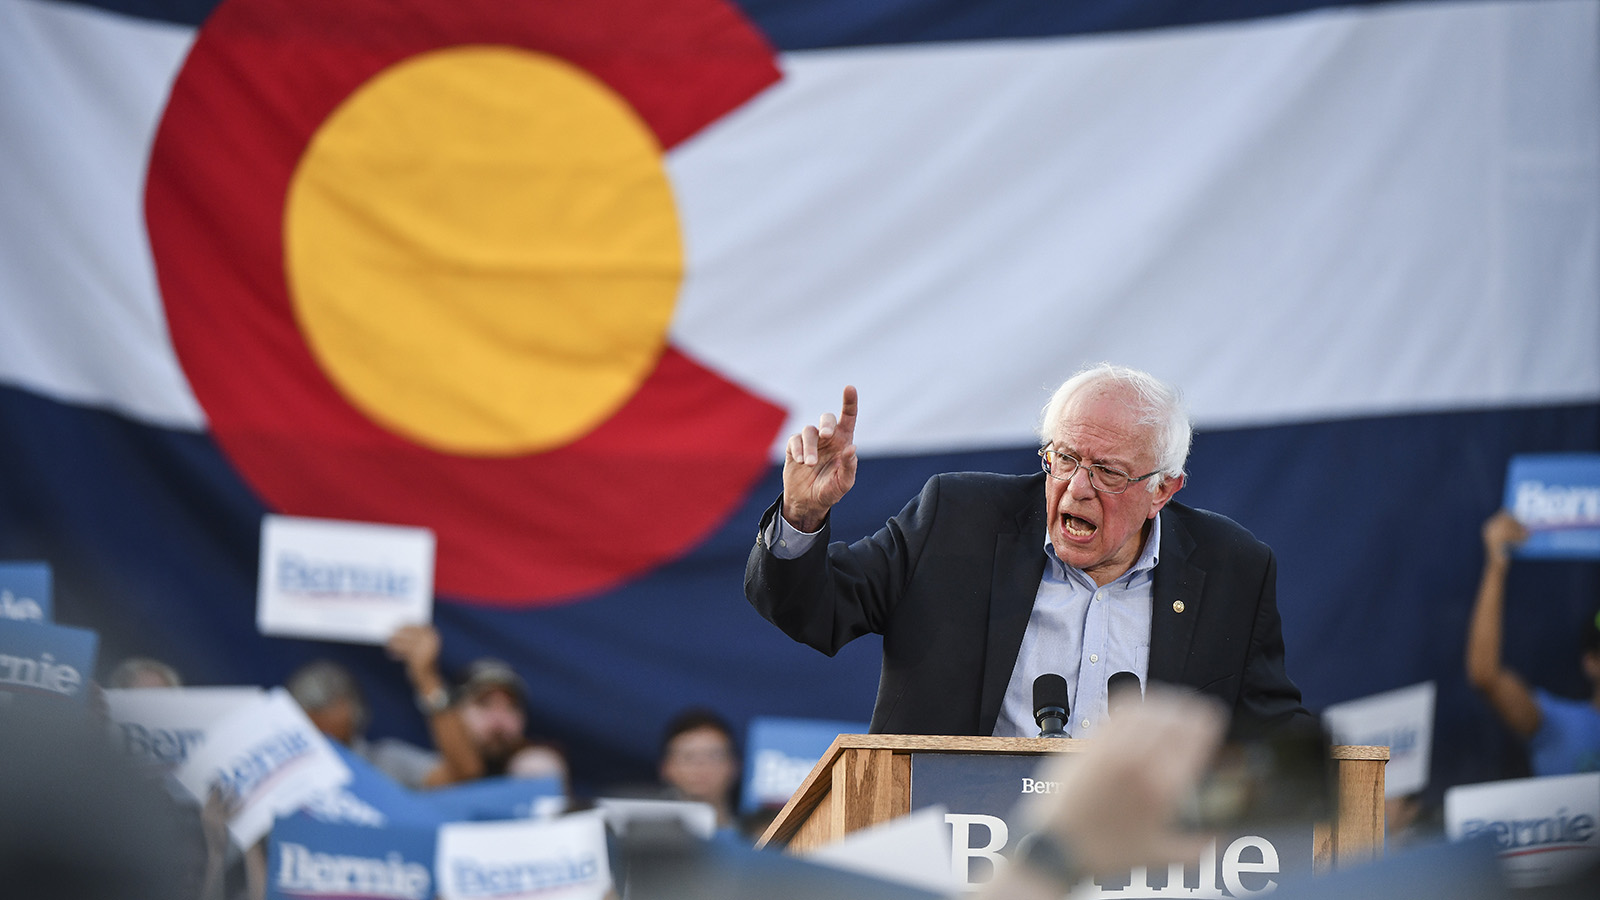 Democratic presidential candidate Sen. Bernie Sanders speaks to supporters at a rally at Civic Center Park on September 9, 2019 in Denver.